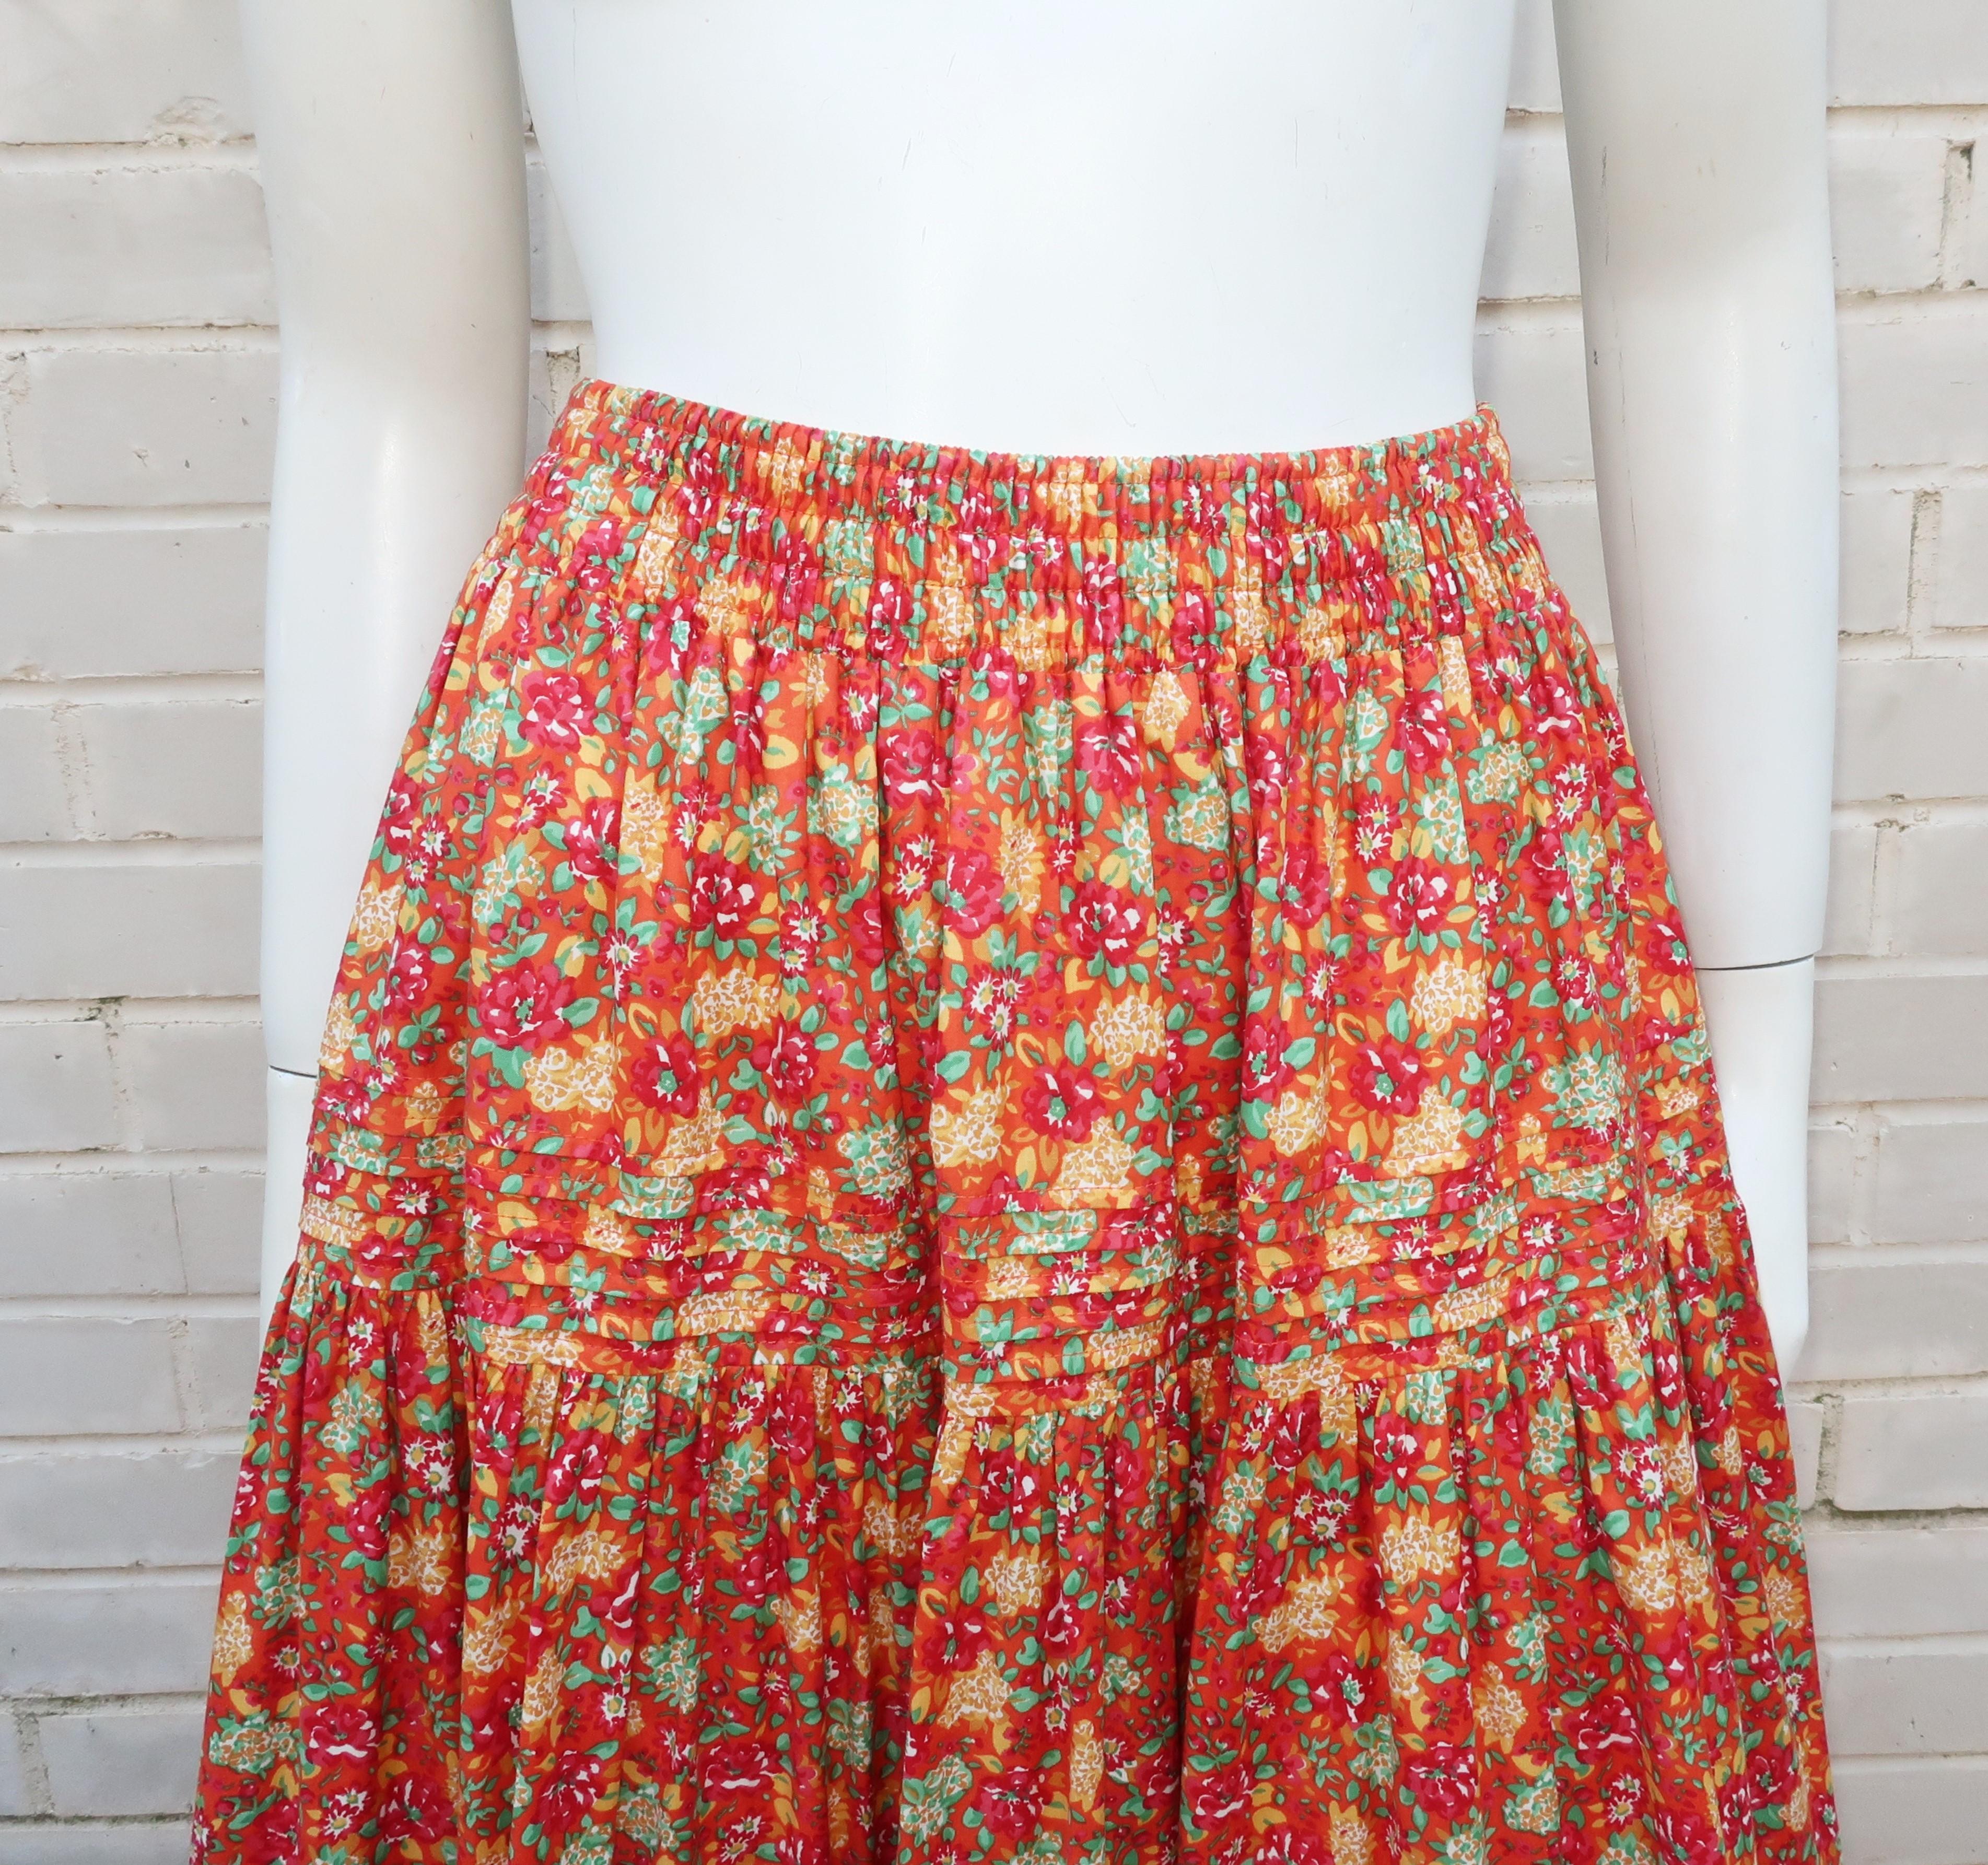 1980's Laura Ashley floral cotton skirt with a prairie style silhouette.  The pull-on construction has an elasticized waistband and tiers with two sections of pin tucking.  The full skirt and floral print in shades of orange, red, yellow and green